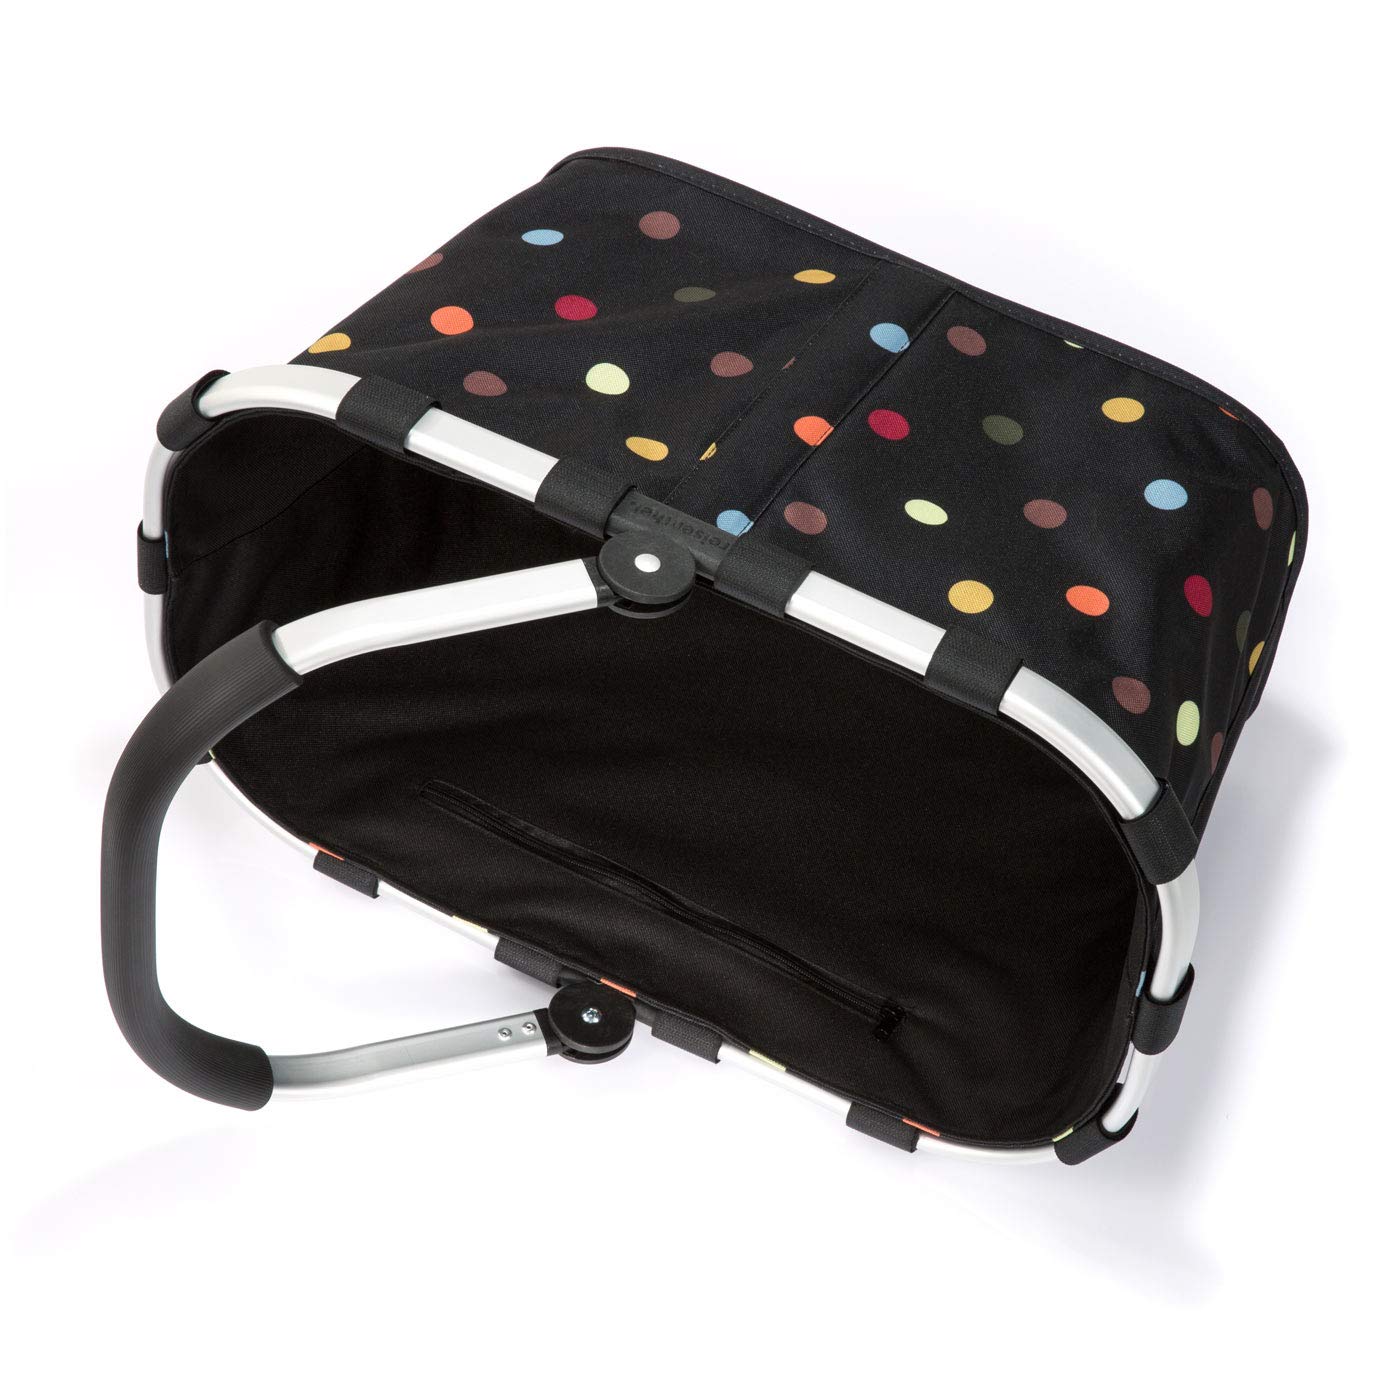 reisenthel carrybag dots - Sturdy shopping basket with plenty of storage space and practical inner pocket - Elegant and water-repellent design